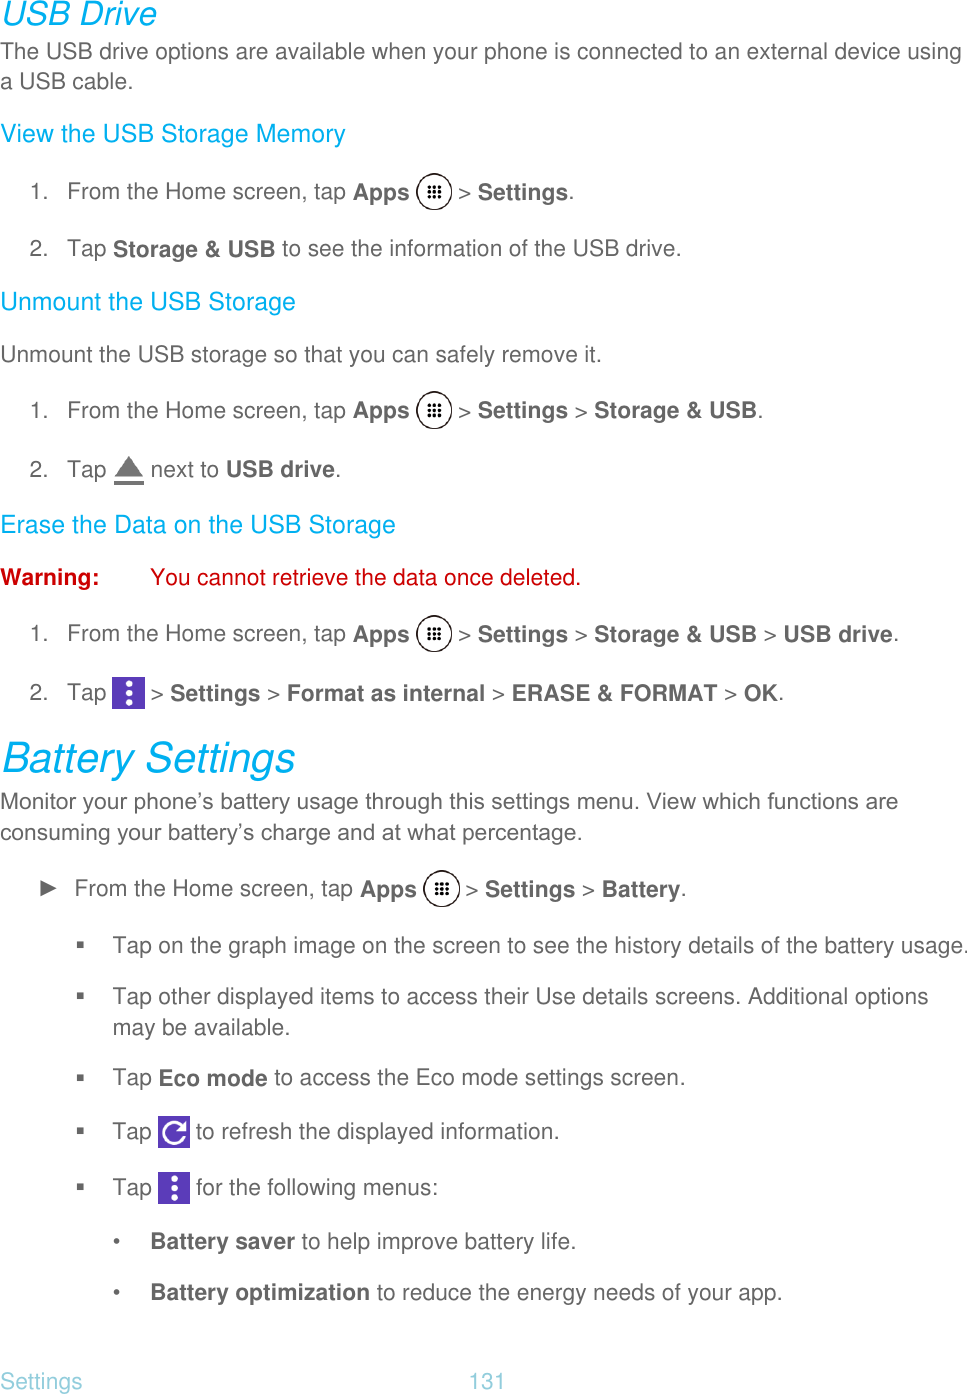 Settings  131   USB Drive The USB drive options are available when your phone is connected to an external device using a USB cable. View the USB Storage Memory 1.  From the Home screen, tap Apps   &gt; Settings. 2. Tap Storage &amp; USB to see the information of the USB drive. Unmount the USB Storage Unmount the USB storage so that you can safely remove it. 1.  From the Home screen, tap Apps   &gt; Settings &gt; Storage &amp; USB. 2. Tap   next to USB drive. Erase the Data on the USB Storage Warning:  You cannot retrieve the data once deleted. 1.  From the Home screen, tap Apps   &gt; Settings &gt; Storage &amp; USB &gt; USB drive. 2. Tap   &gt; Settings &gt; Format as internal &gt; ERASE &amp; FORMAT &gt; OK. Battery Settings Monitor your phone’s battery usage through this settings menu. View which functions are consuming your battery’s charge and at what percentage. ►  From the Home screen, tap Apps   &gt; Settings &gt; Battery.  Tap on the graph image on the screen to see the history details of the battery usage.  Tap other displayed items to access their Use details screens. Additional options may be available.  Tap Eco mode to access the Eco mode settings screen.  Tap   to refresh the displayed information.  Tap   for the following menus: • Battery saver to help improve battery life. • Battery optimization to reduce the energy needs of your app. 